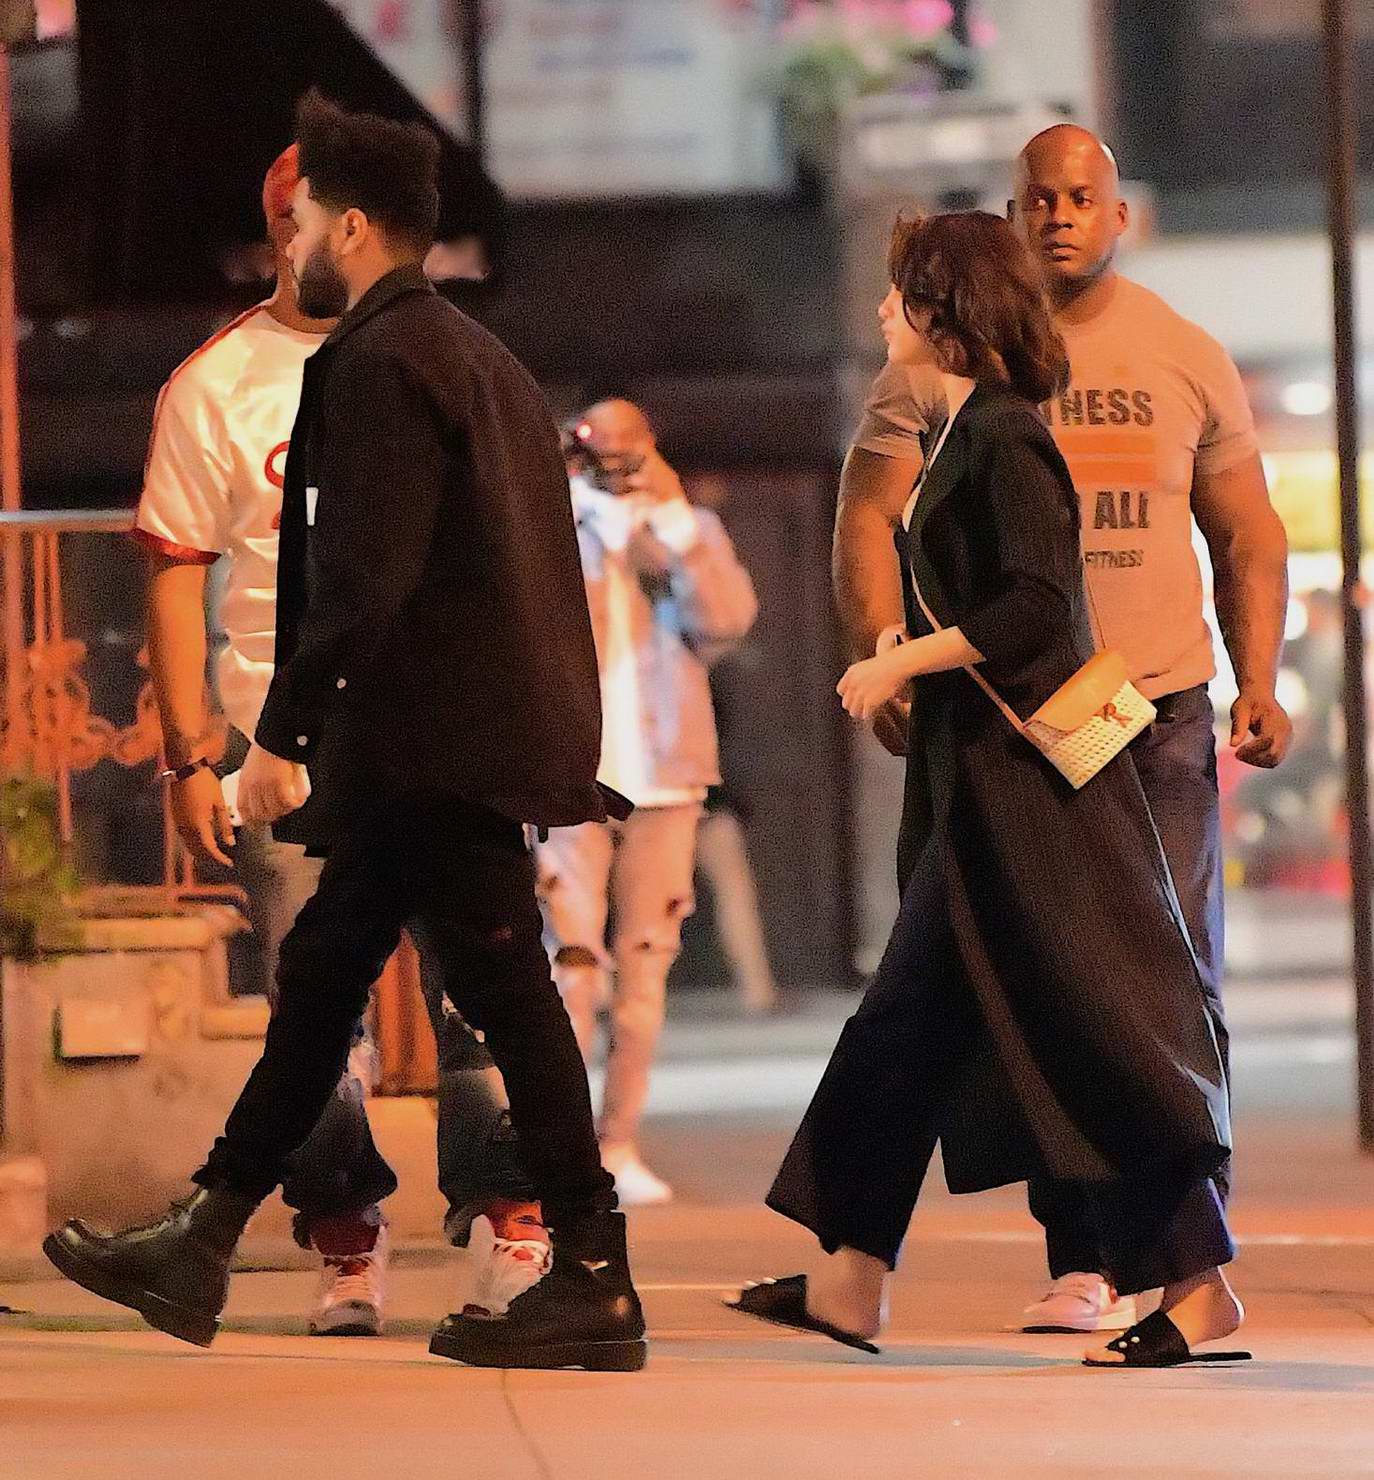 Selena Gomez has an Ice cream date with The Weeknd in New York